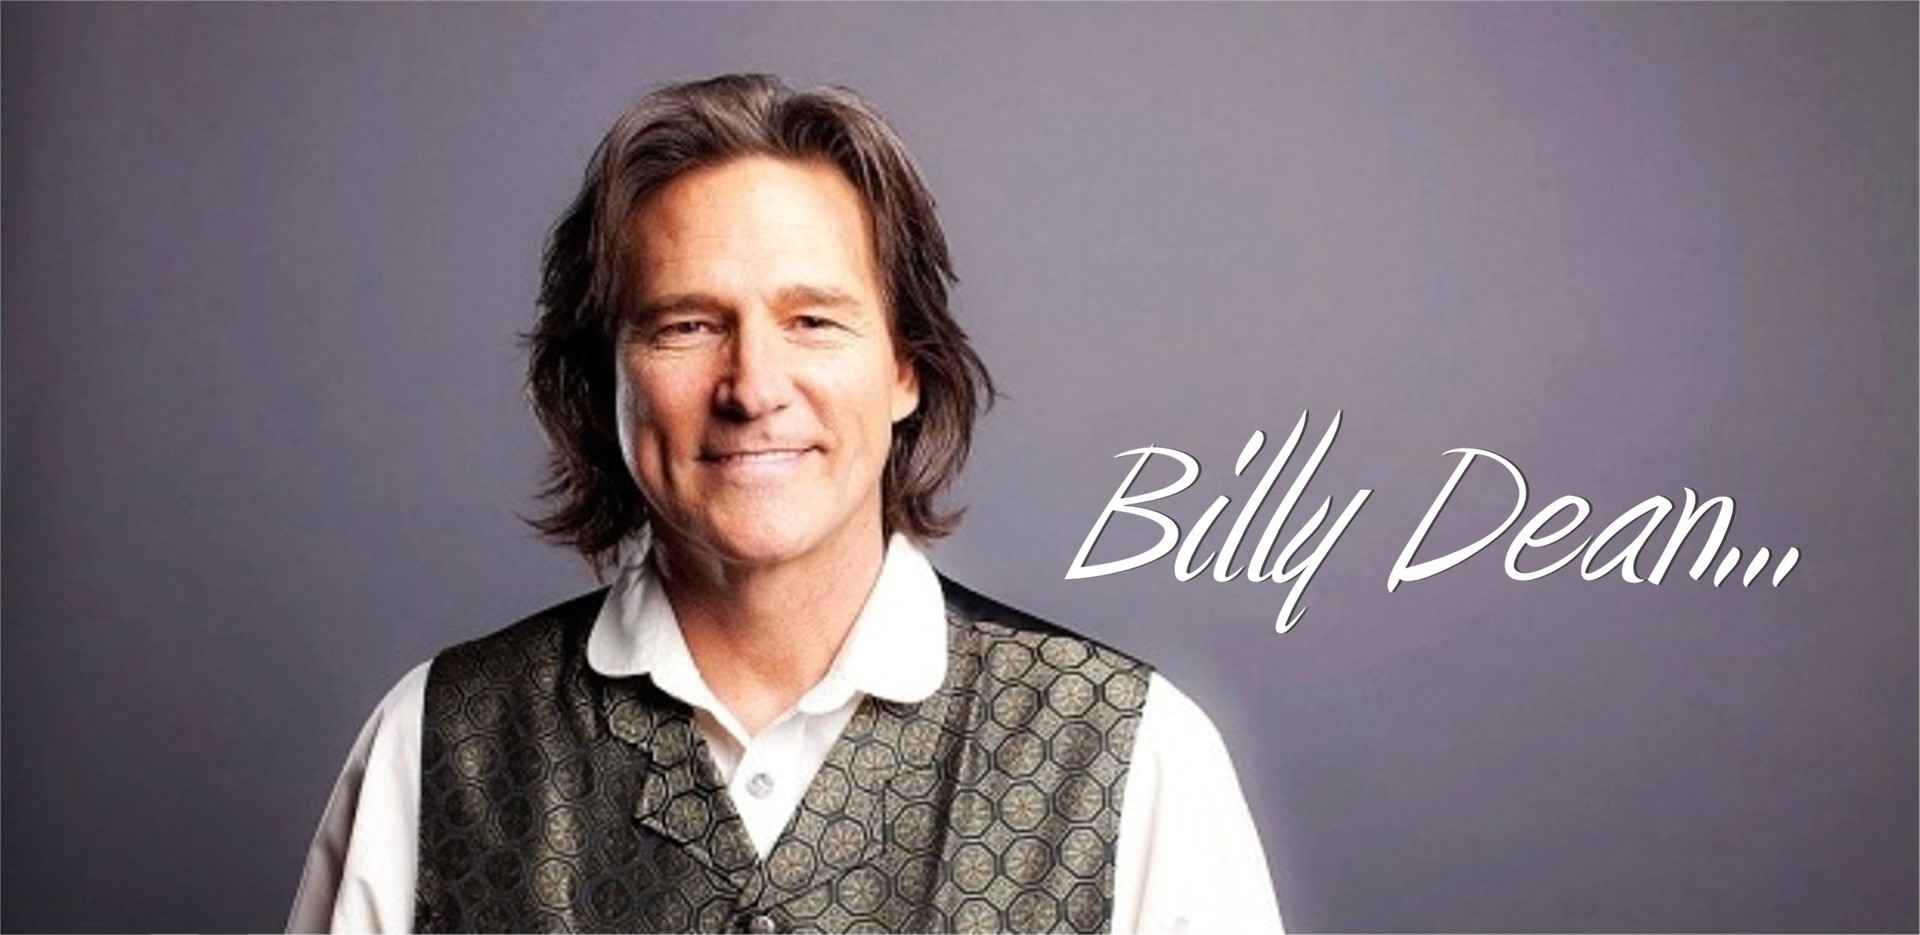 Billy Dean image used with permission